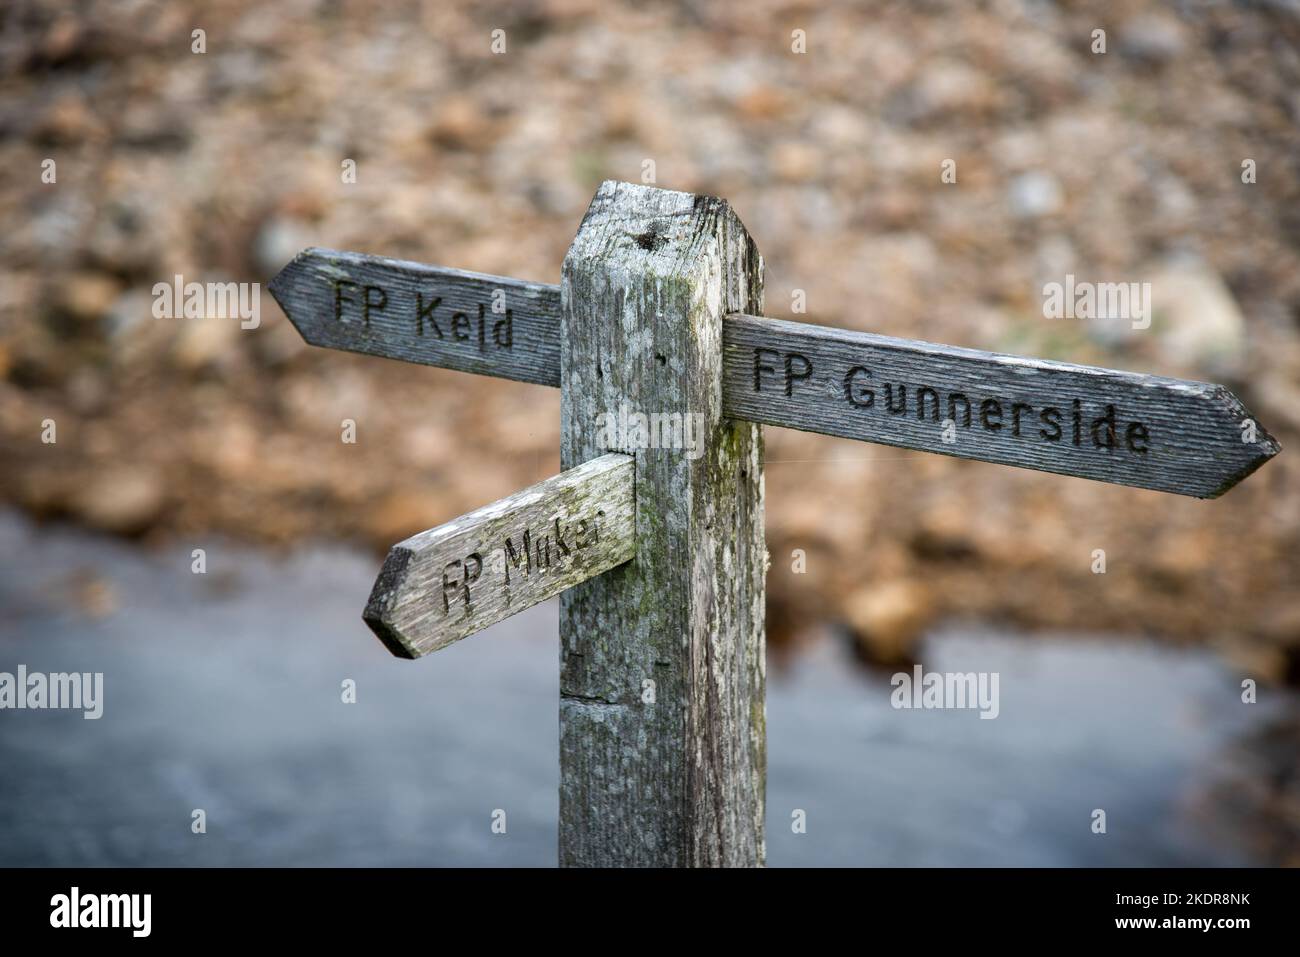 Wooden sign showing the direction to Kled, Muker and Gunnerside at the river swale in the Swaledale in Yorkshire, UK. Stock Photo